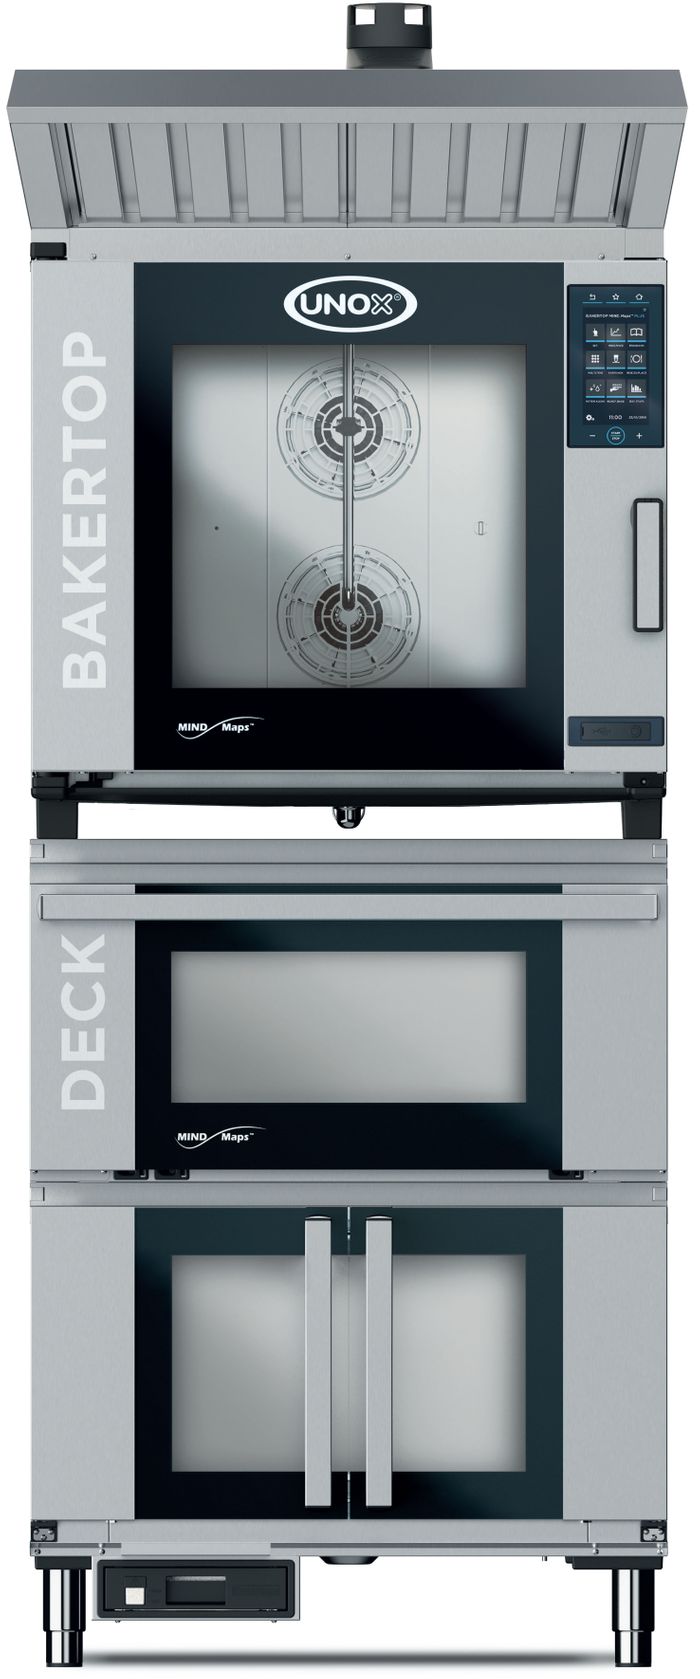 The great kitchen bake-off – Unox delivers space-saving equipment solution